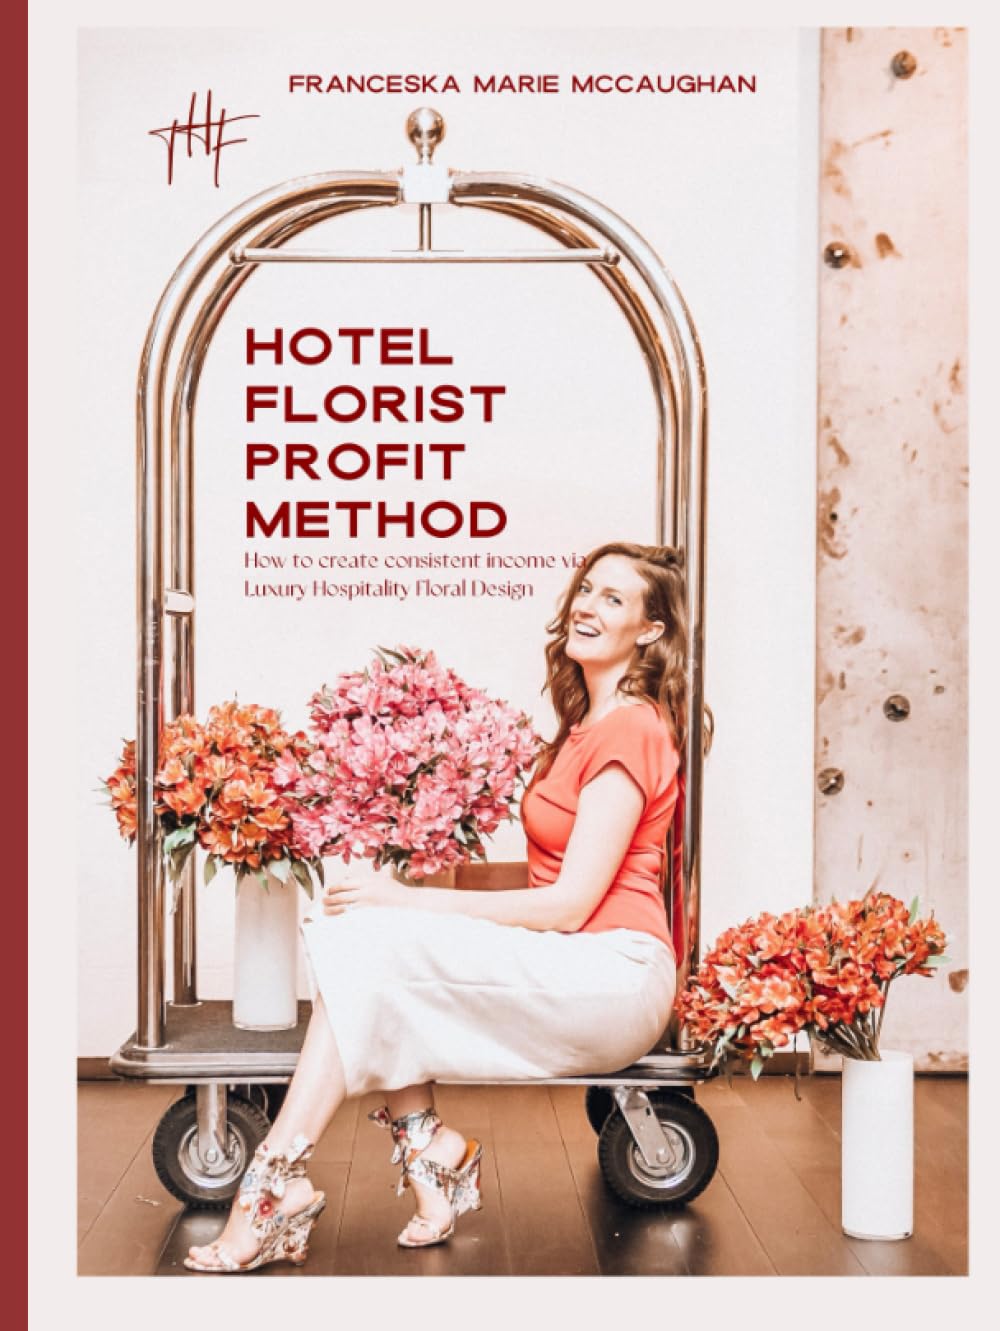 Hotel Florist Profit Method: How to Create Consistent Income via Luxury Hospitality Floral Design